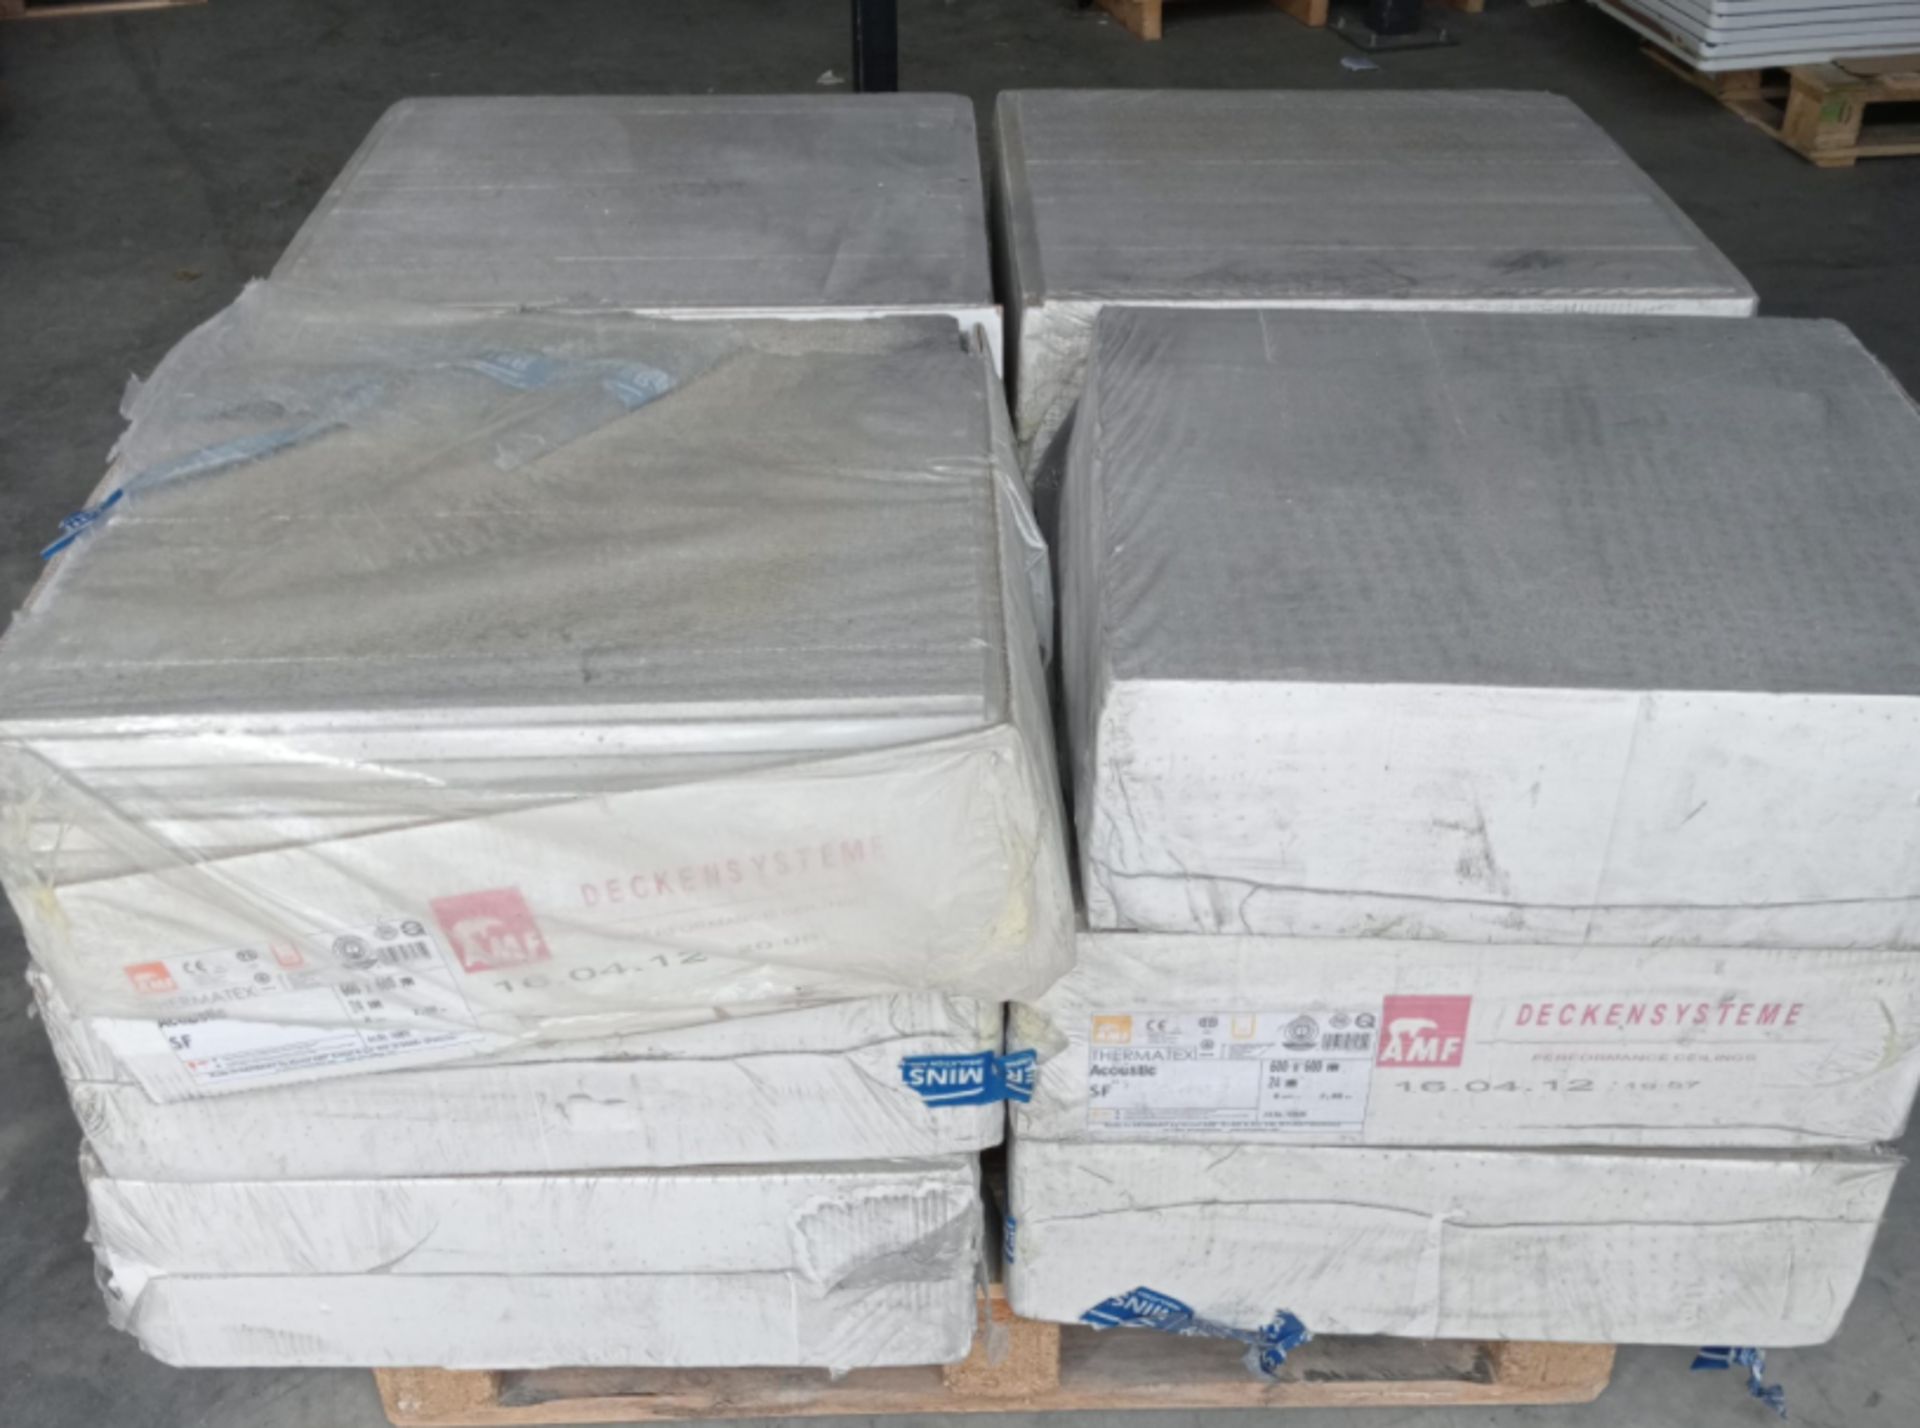 JOBLOT OF 12 BOXES THERMATEX SF ACOUSTIC CEILING TILES EDGE 600 X 600 X 24MM - GRADE B